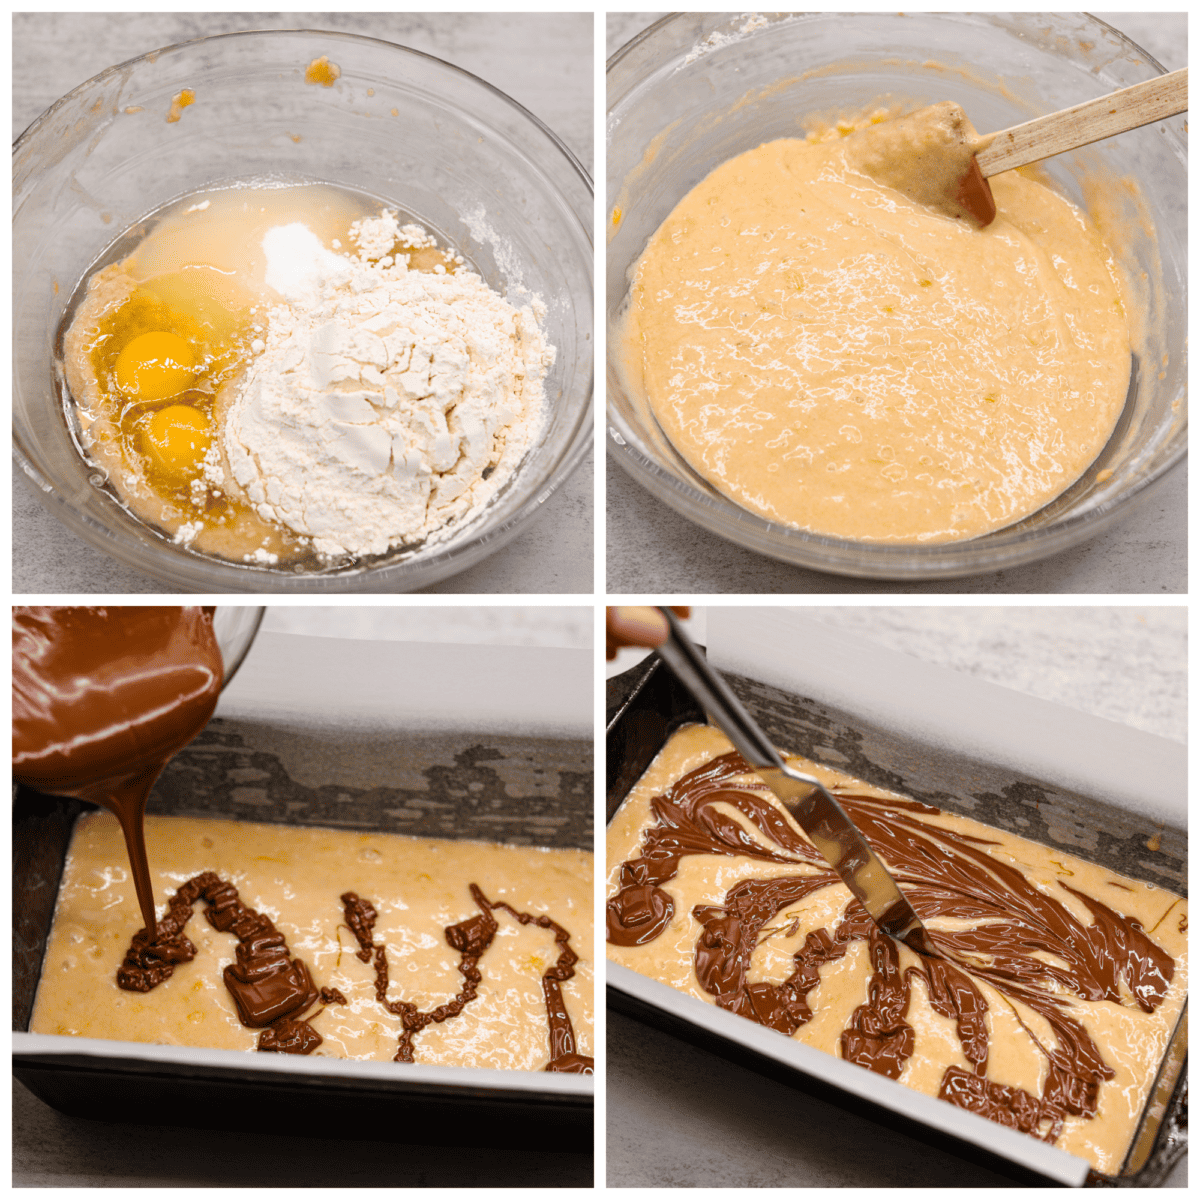 4-photo collage of the zucchini bread batter being prepared.